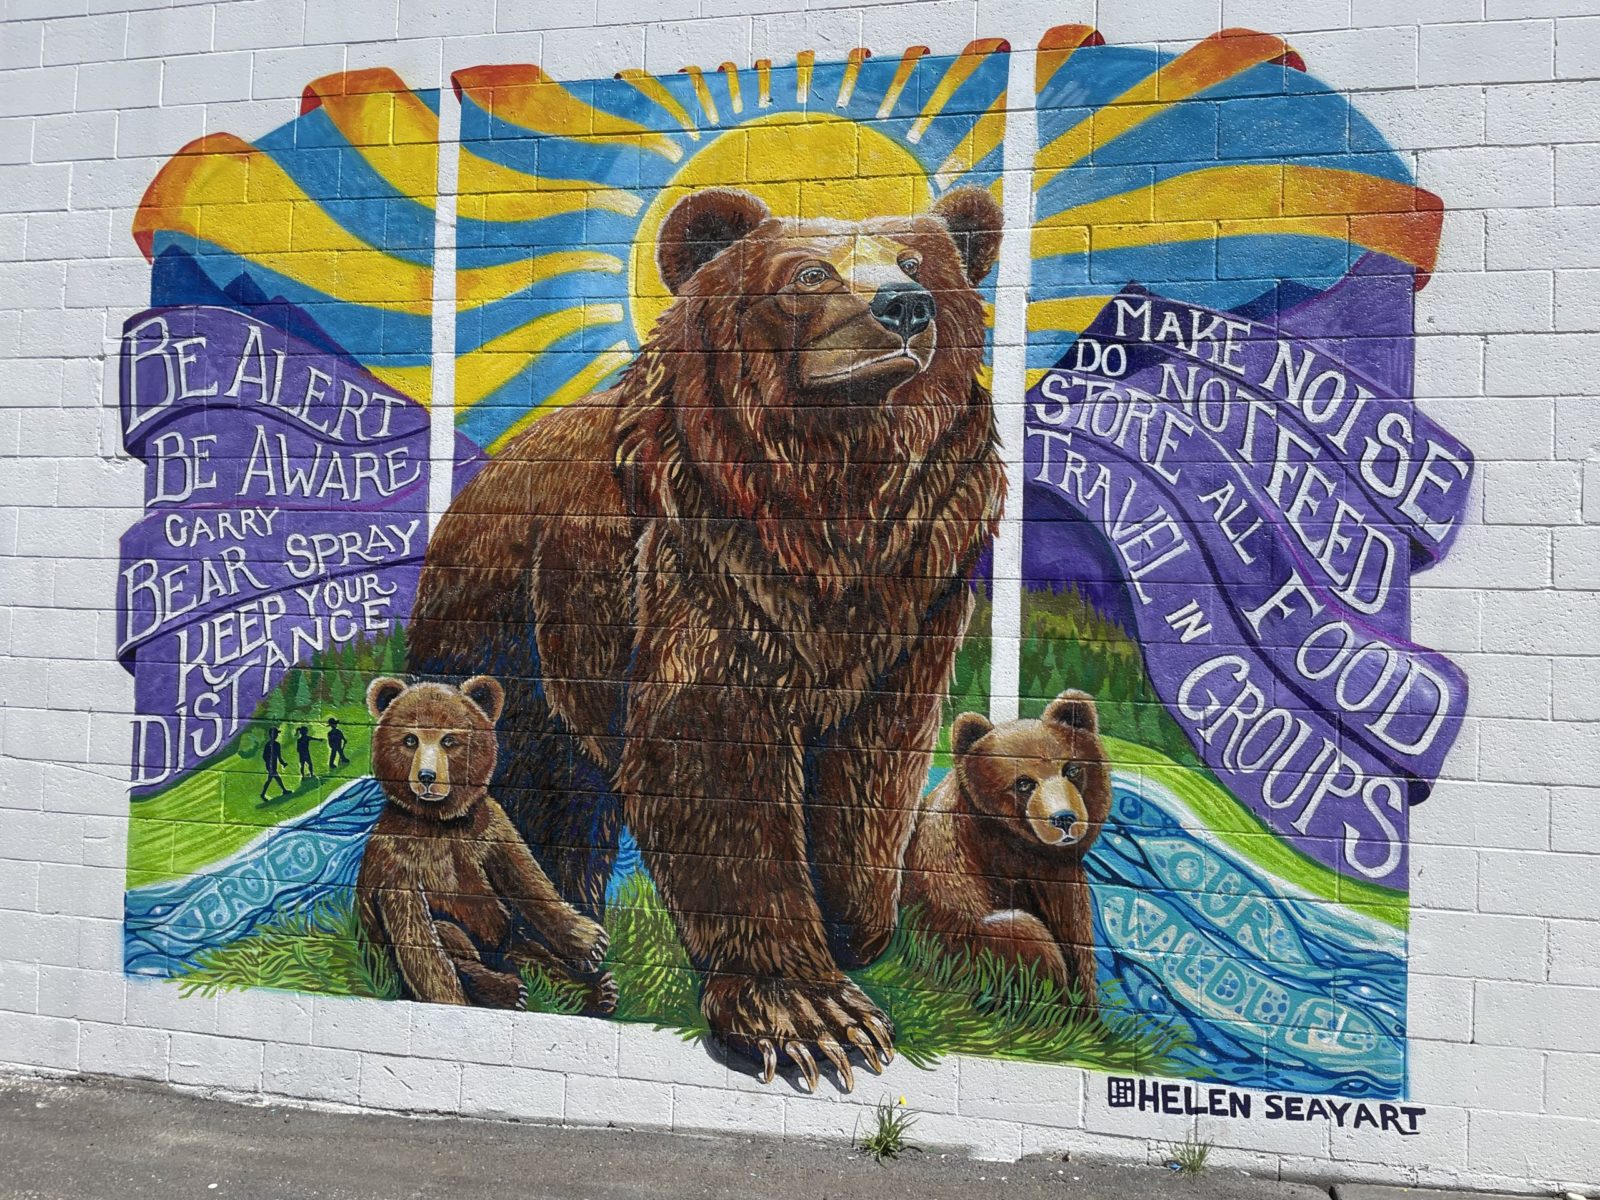 This permanent mural by Helen Seay will remind visitors and locals how to responsibly recreate in bear country.